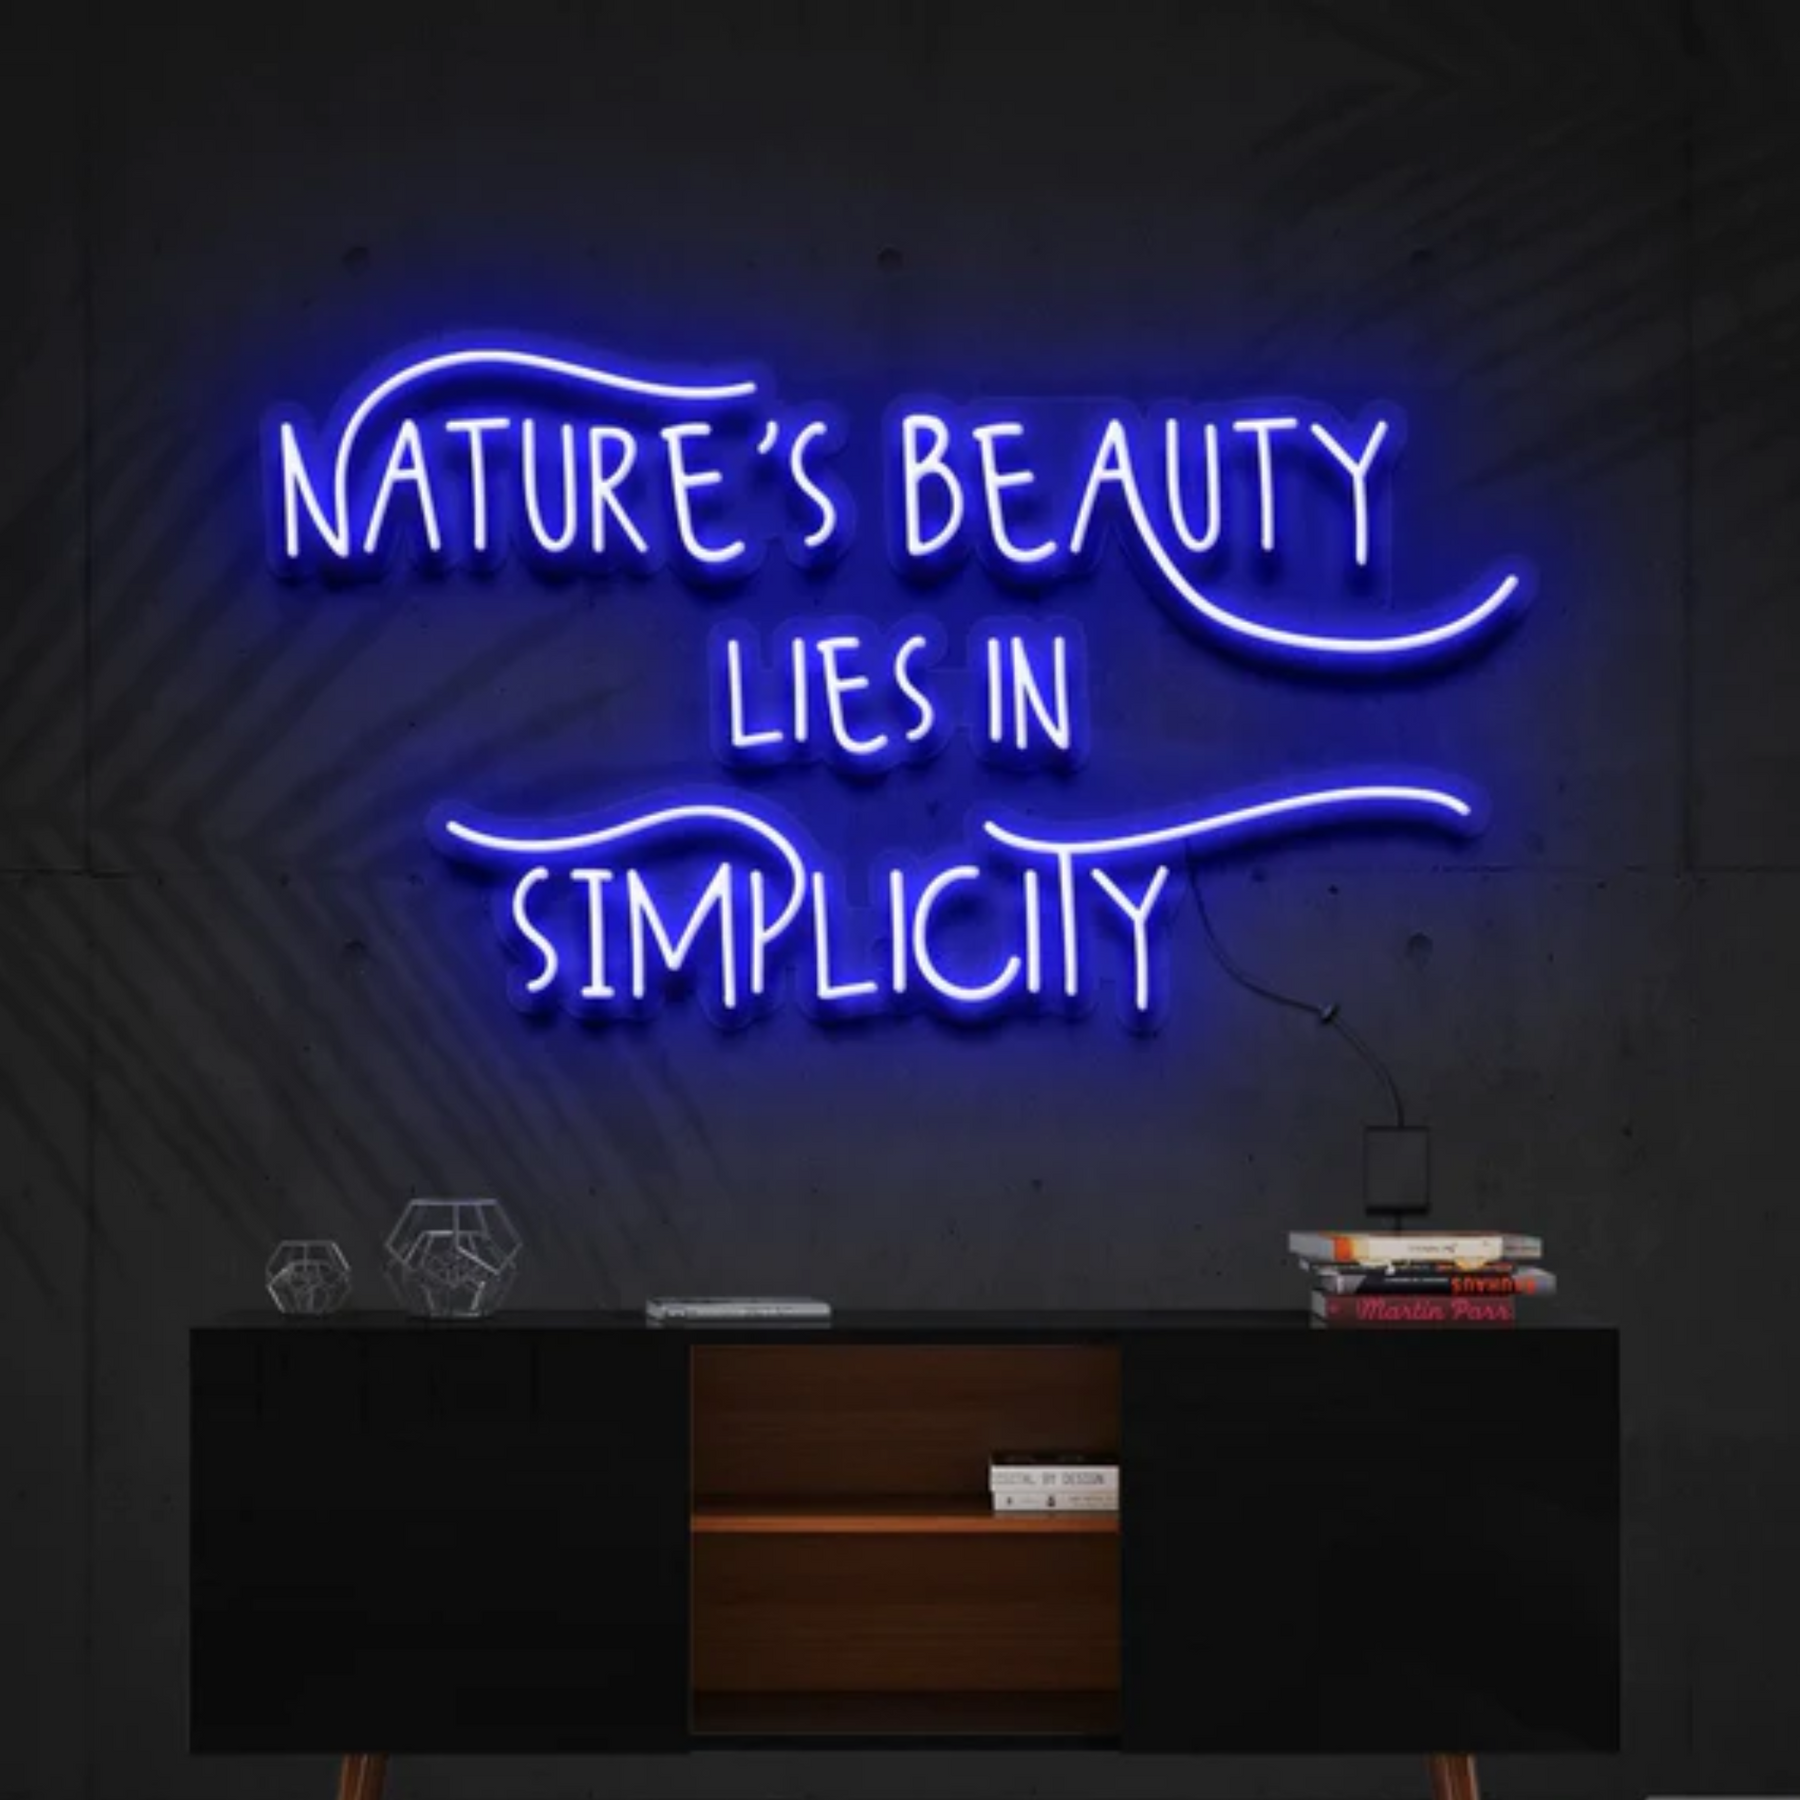 Nature's Beauty Lies In Simplicity